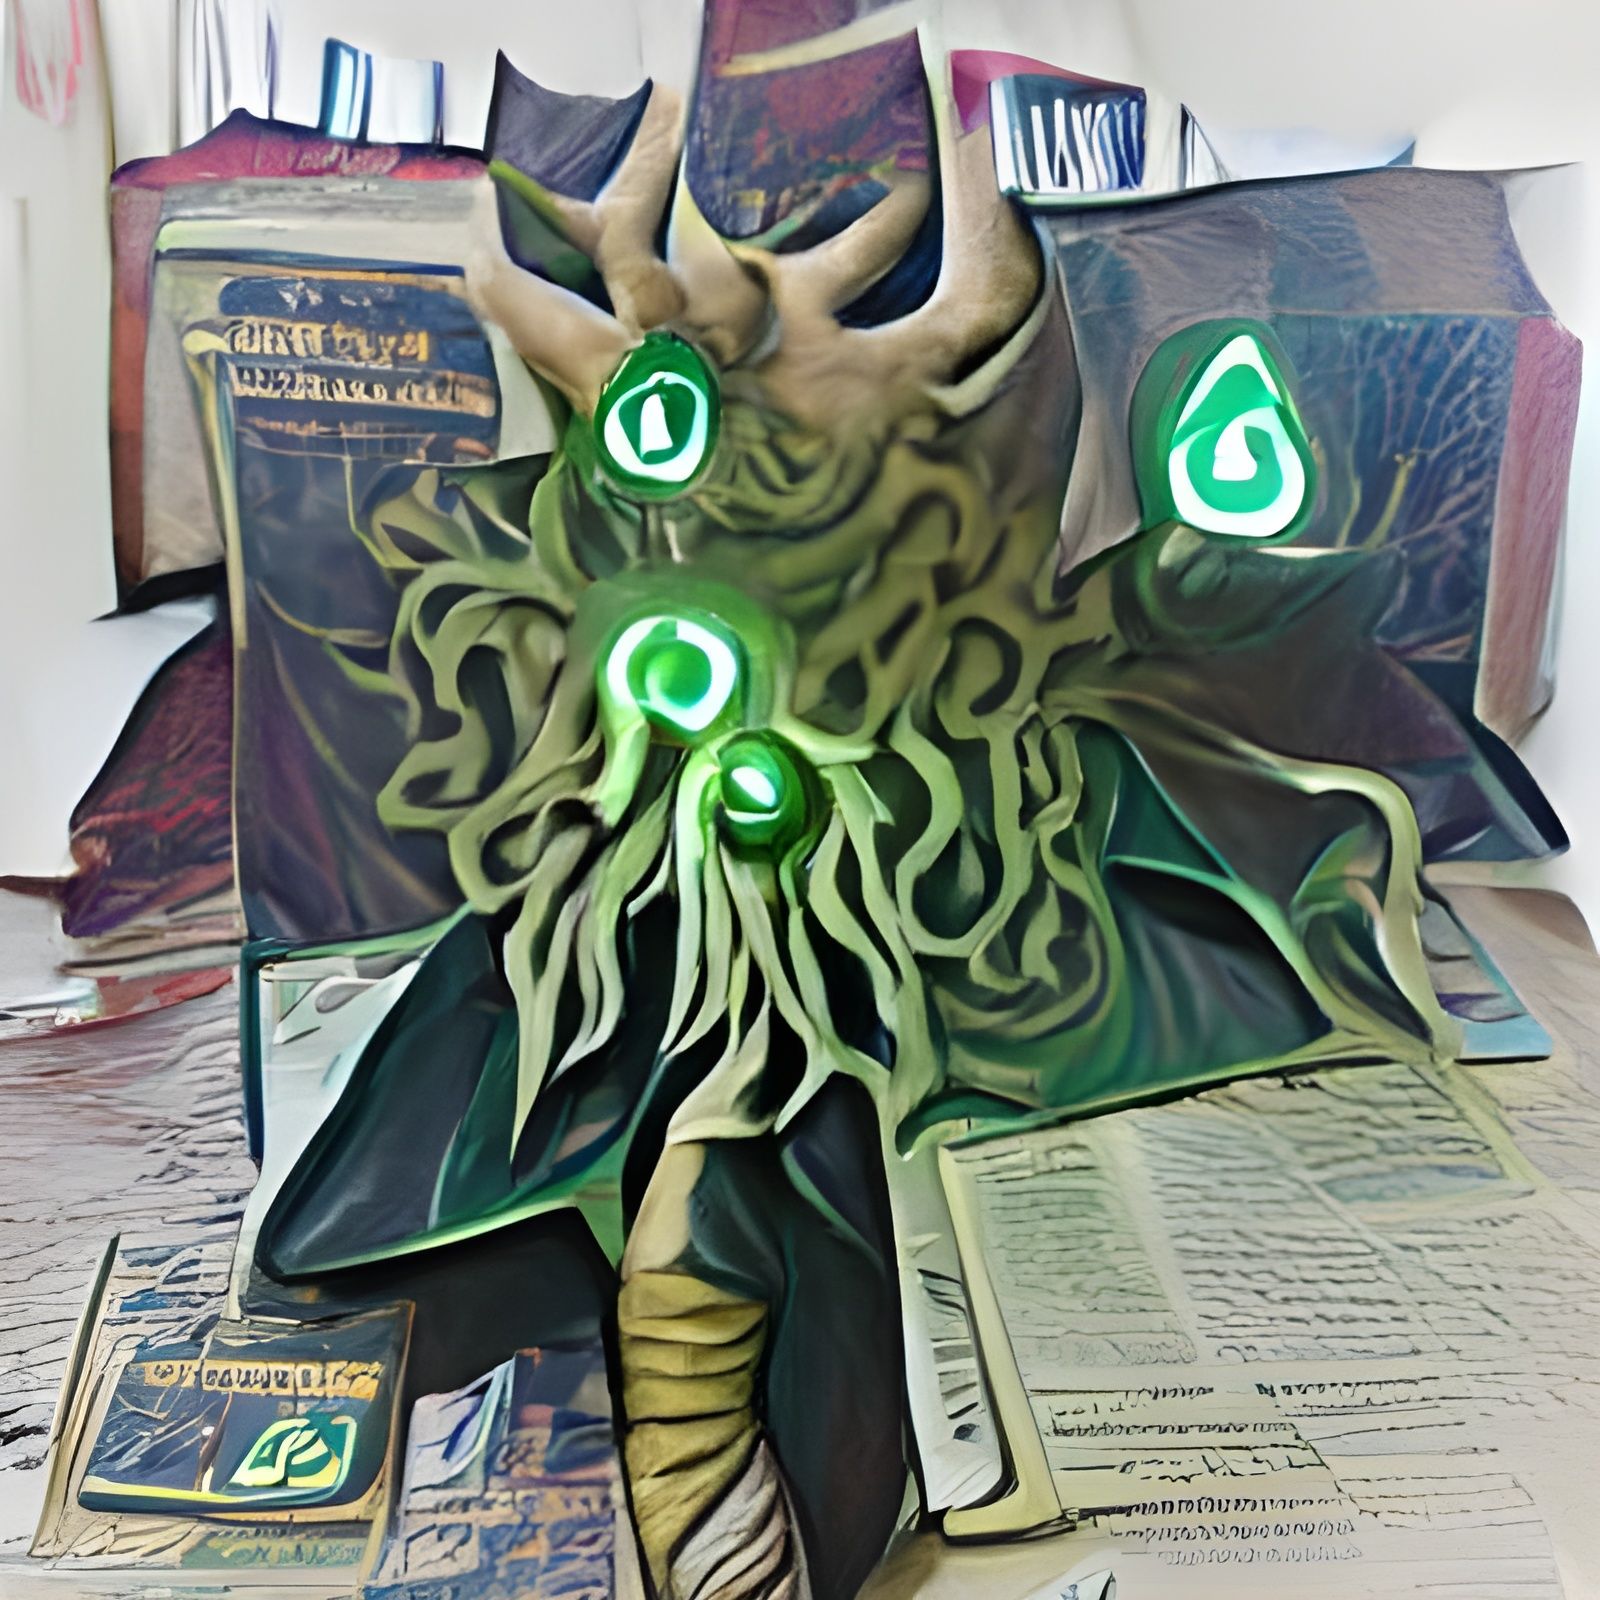 Eldritch Abomination reads the news